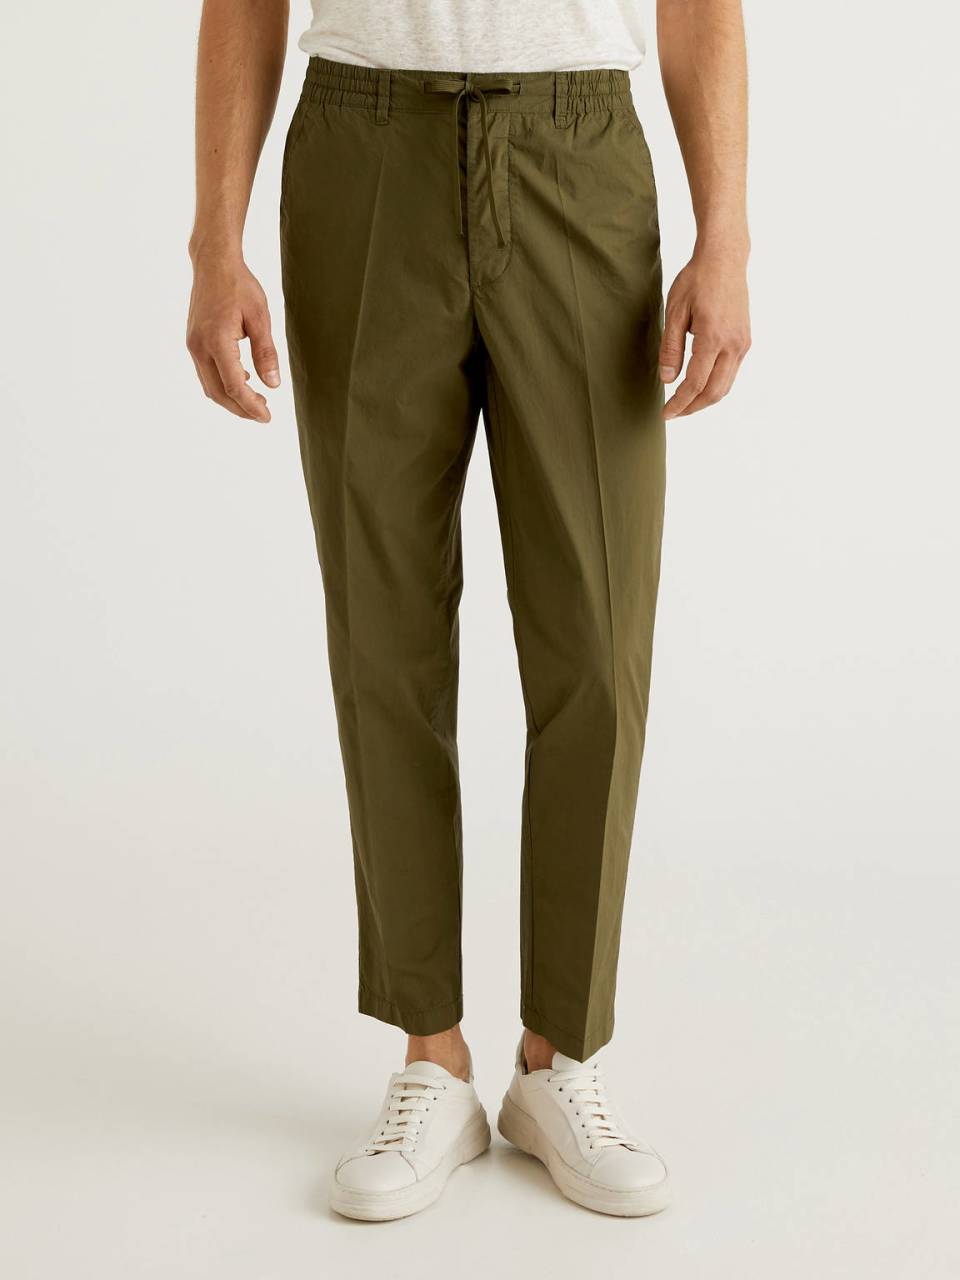 Benetton Light trousers with drawstring. 1